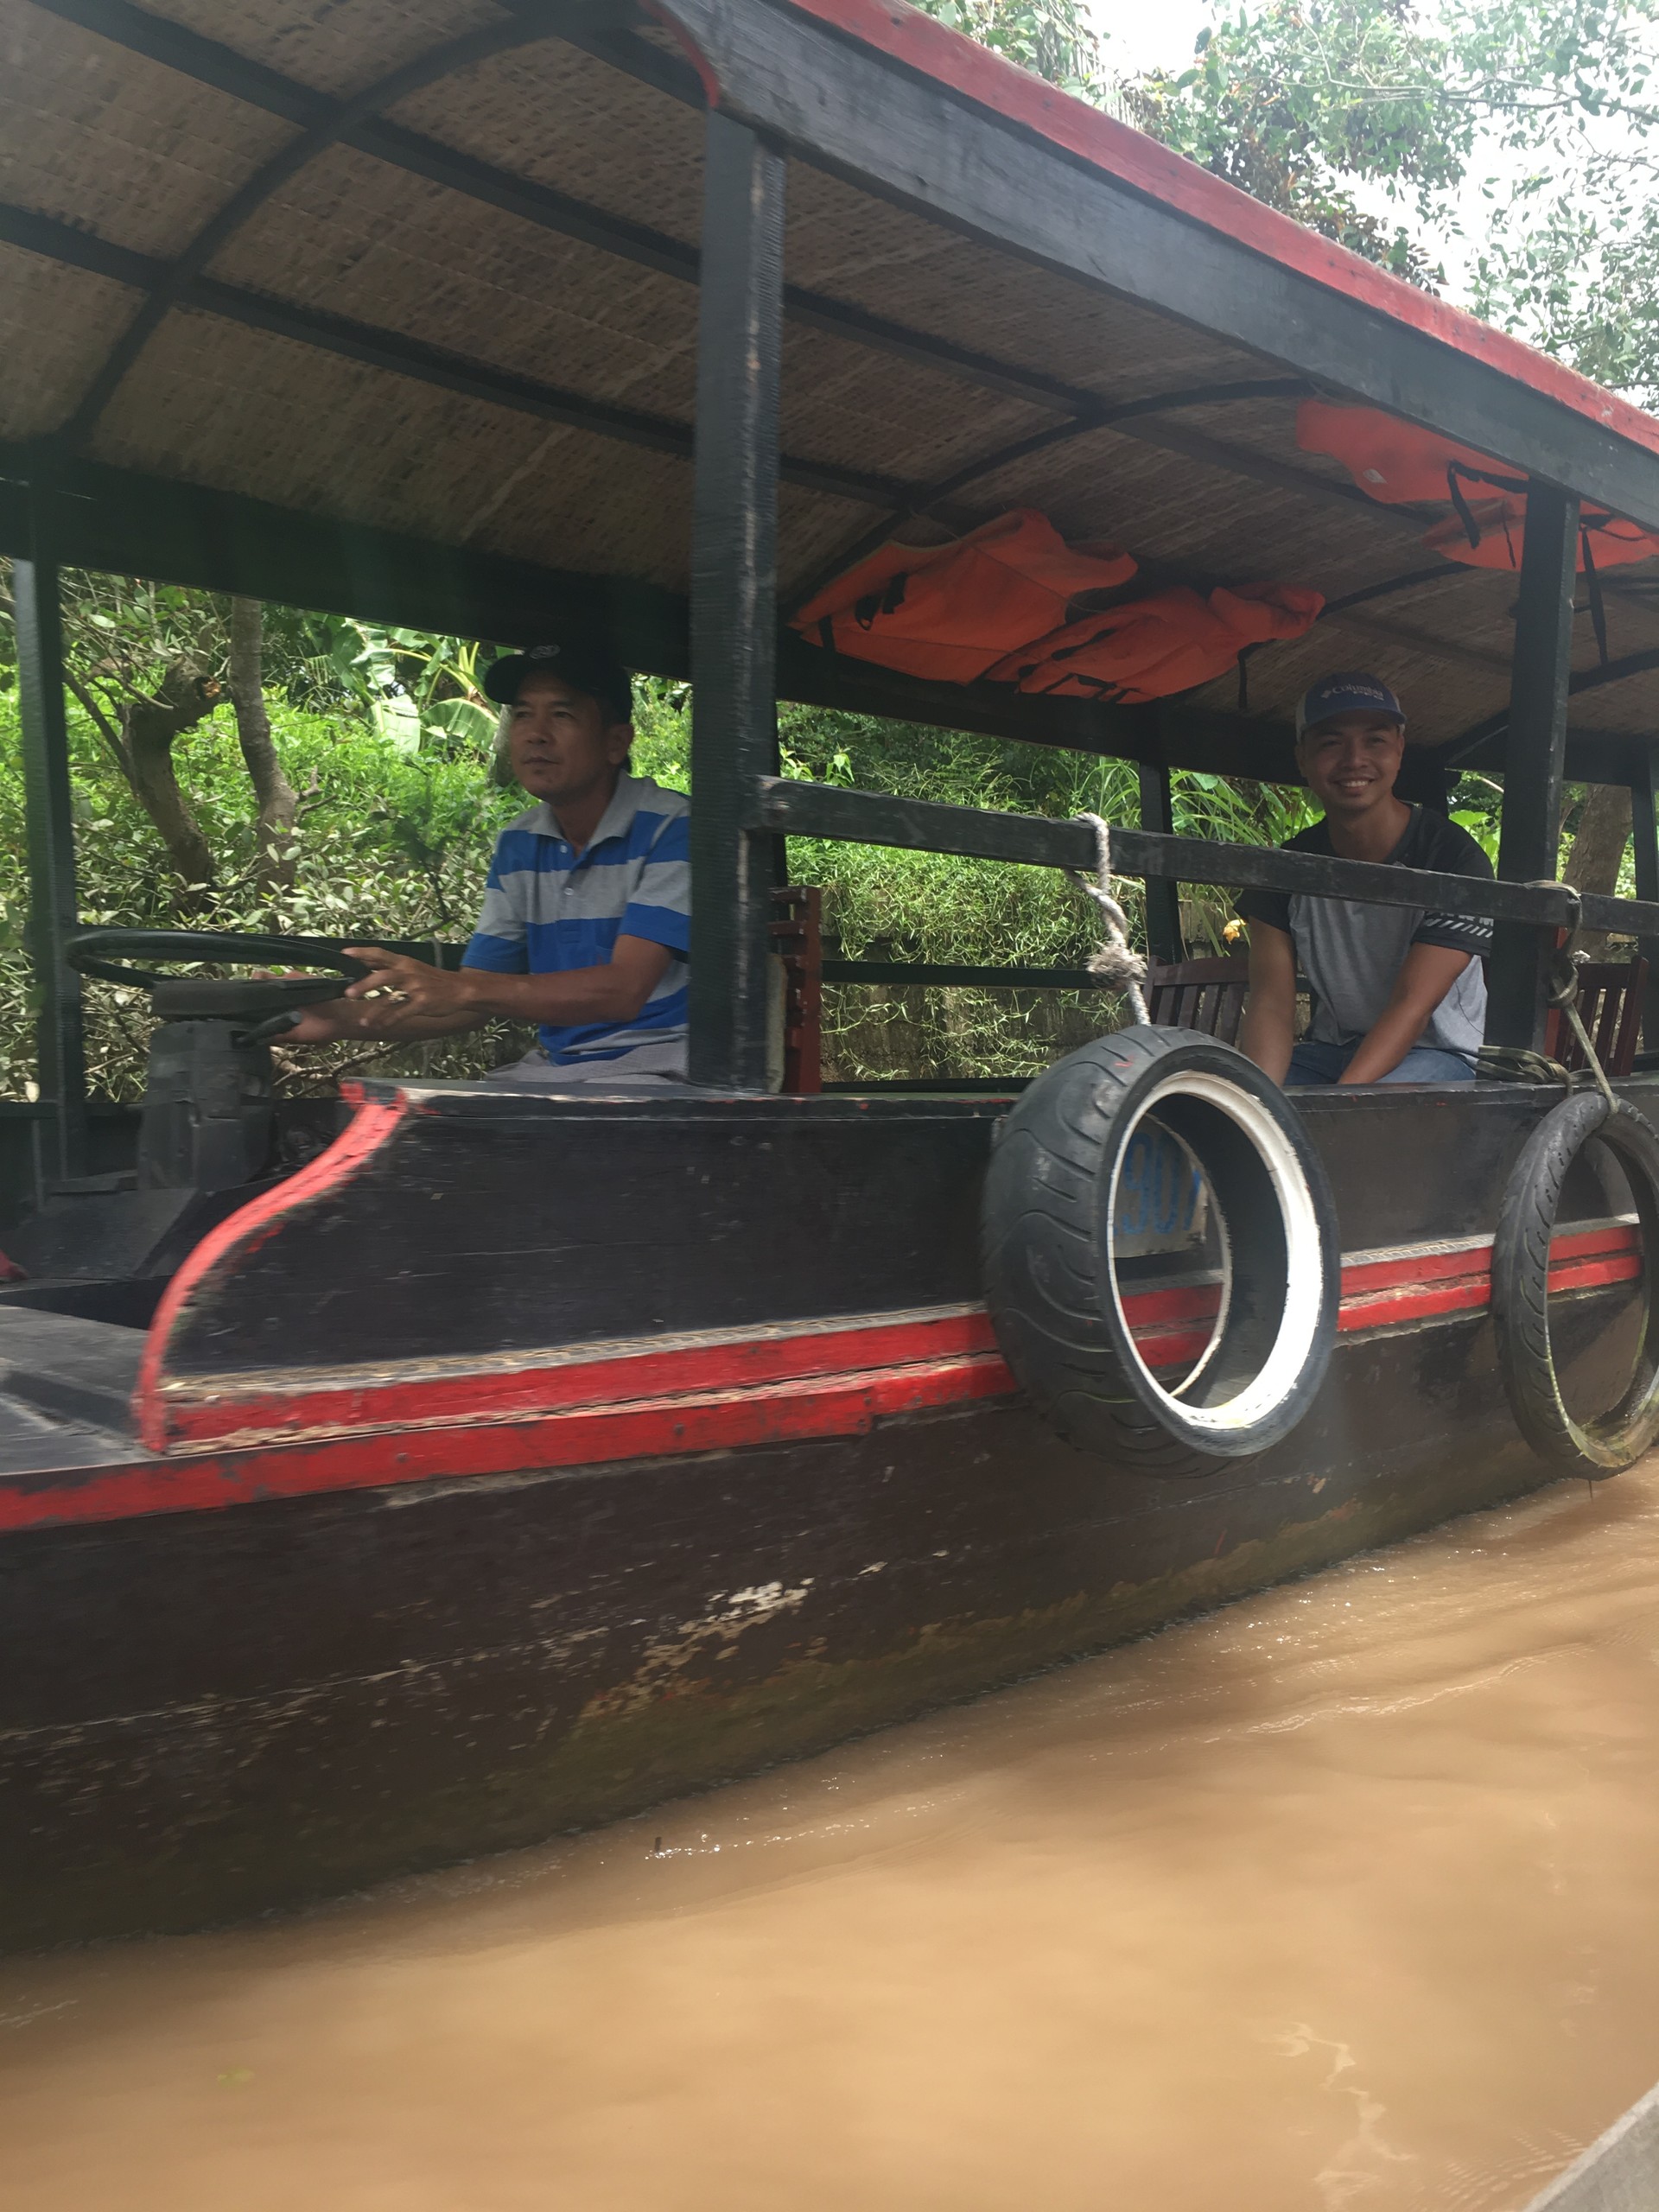 day-trip-cai-be-mekong-delta-1c0c7c3f92b